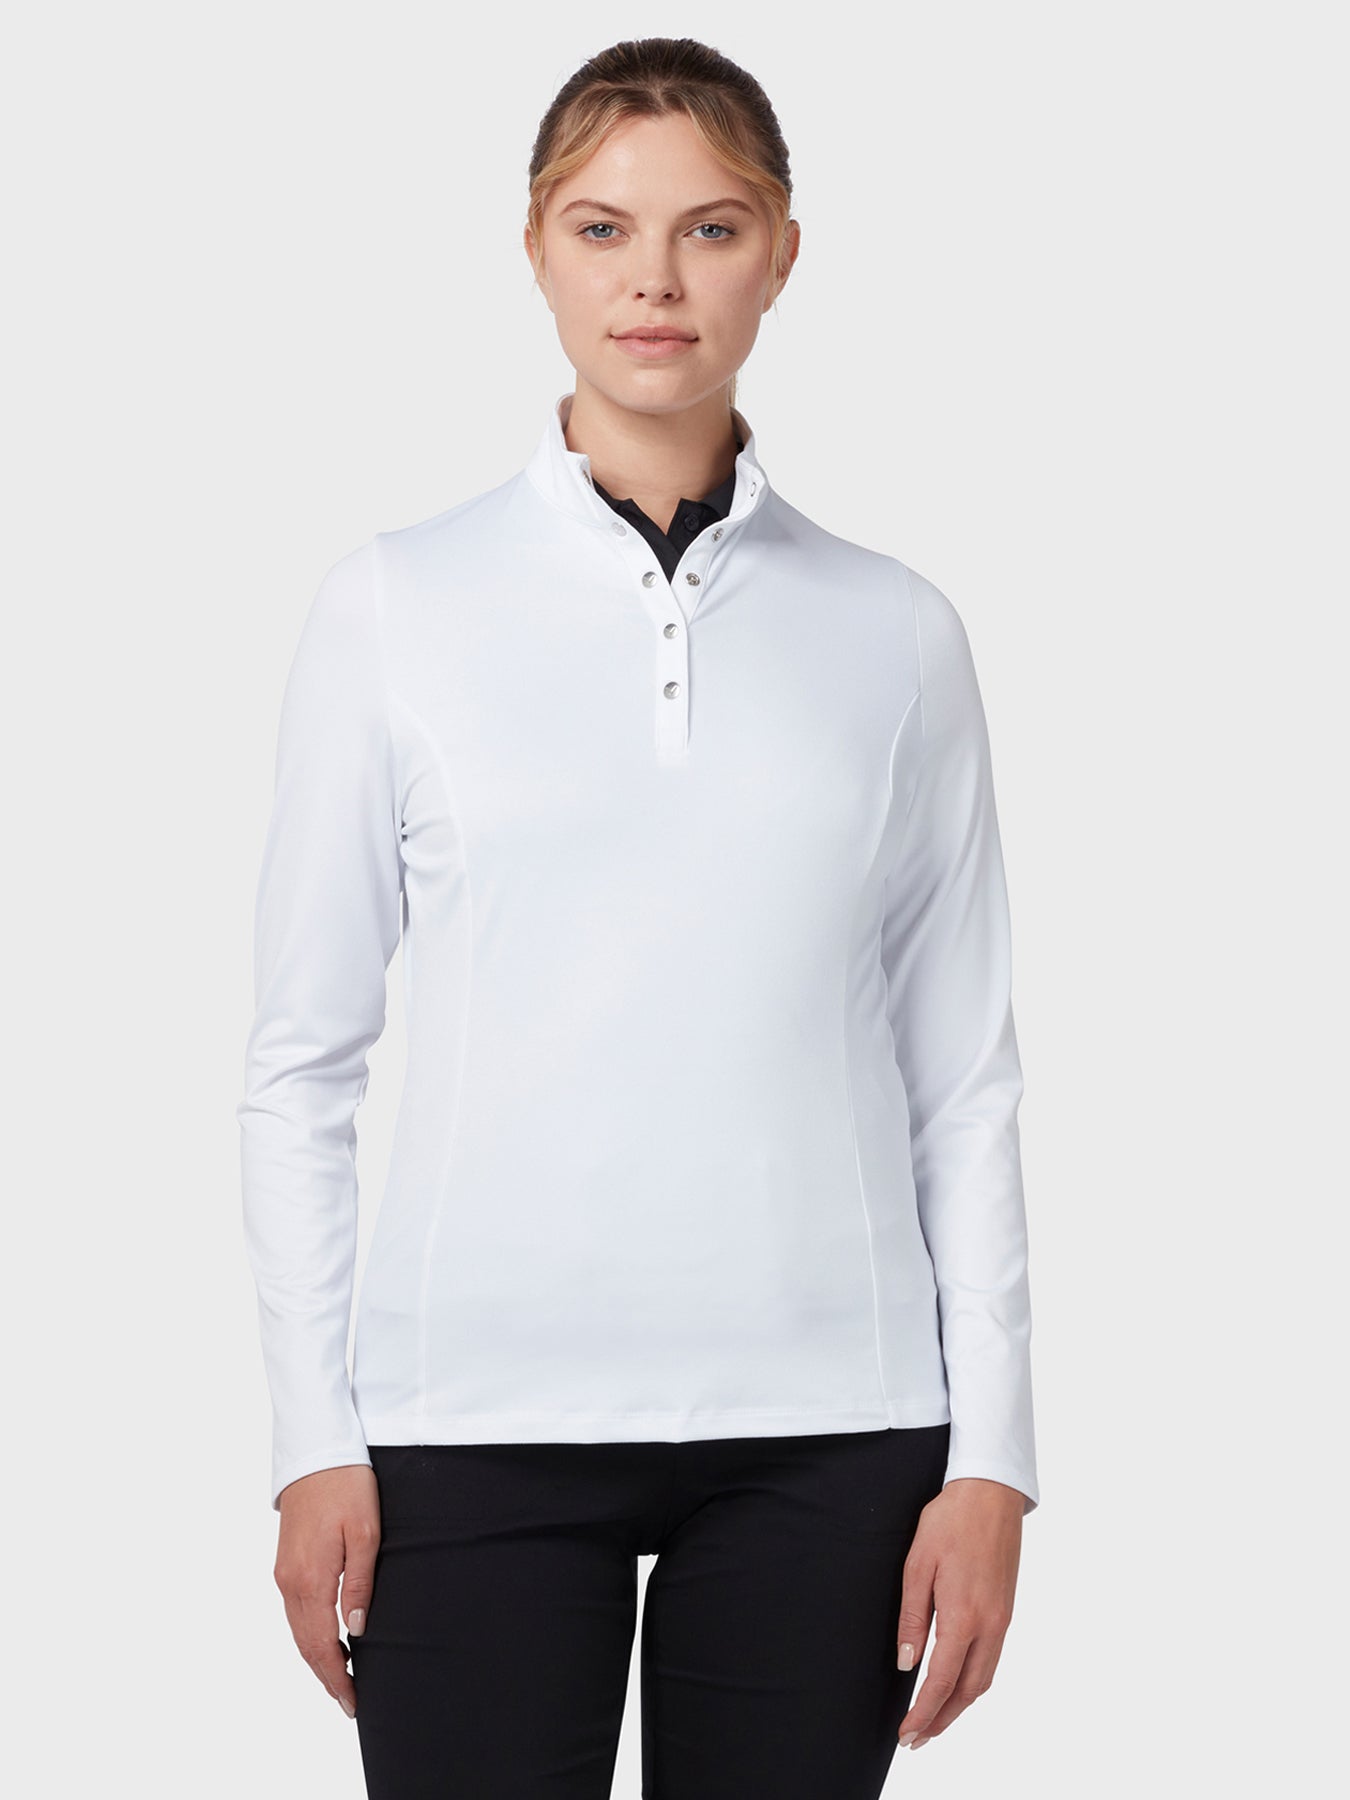 View Womens Thermal Longsleeve Fleece Back Jersey Polo In Brilliant White Brilliant White S information